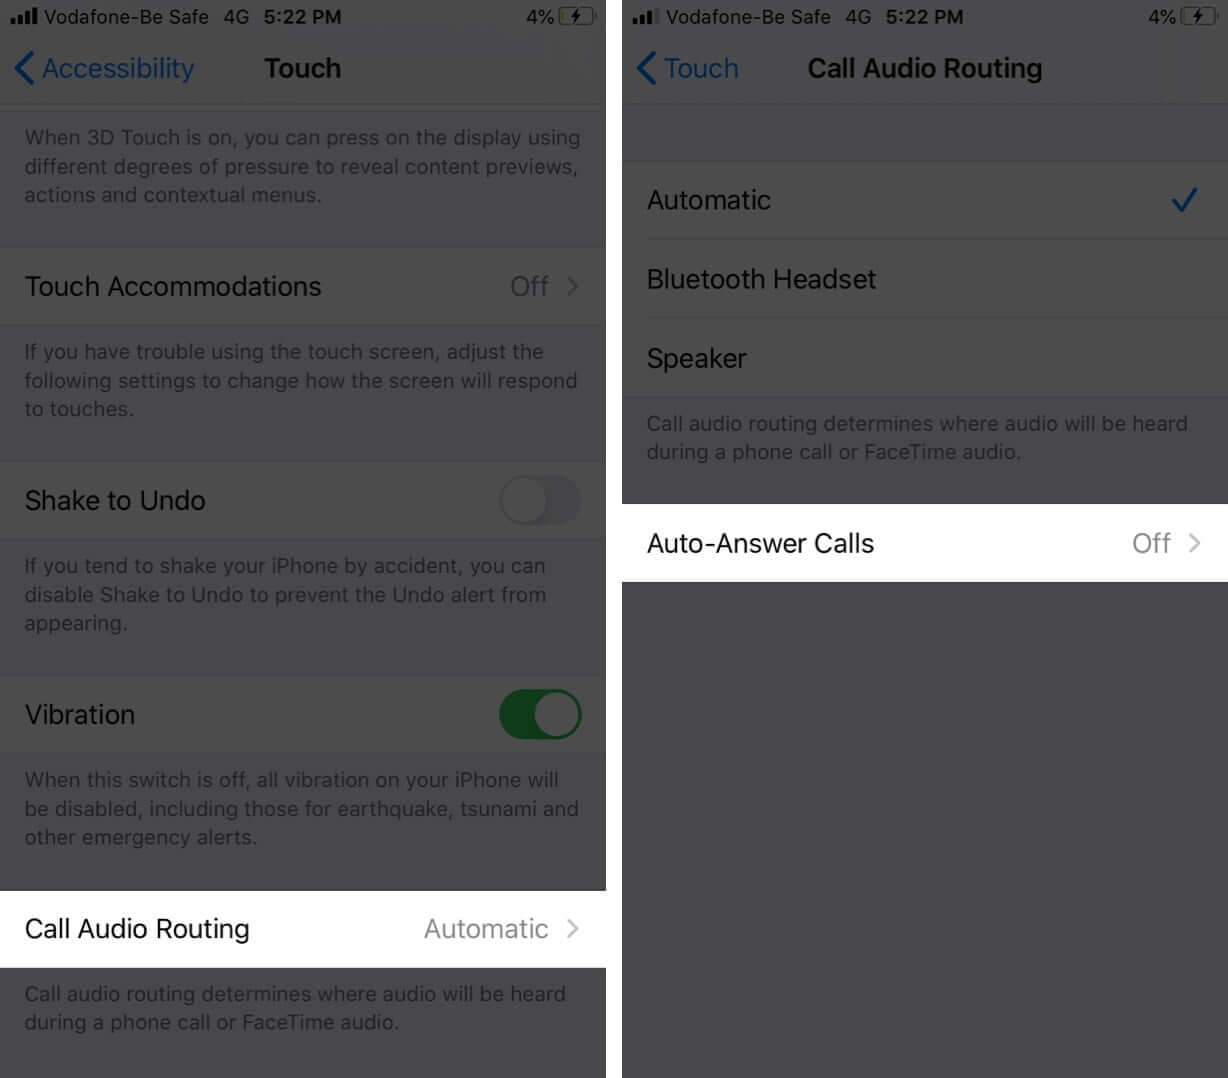 Tap on Call Audio Routing and Then Tap Auto-Answer Calls